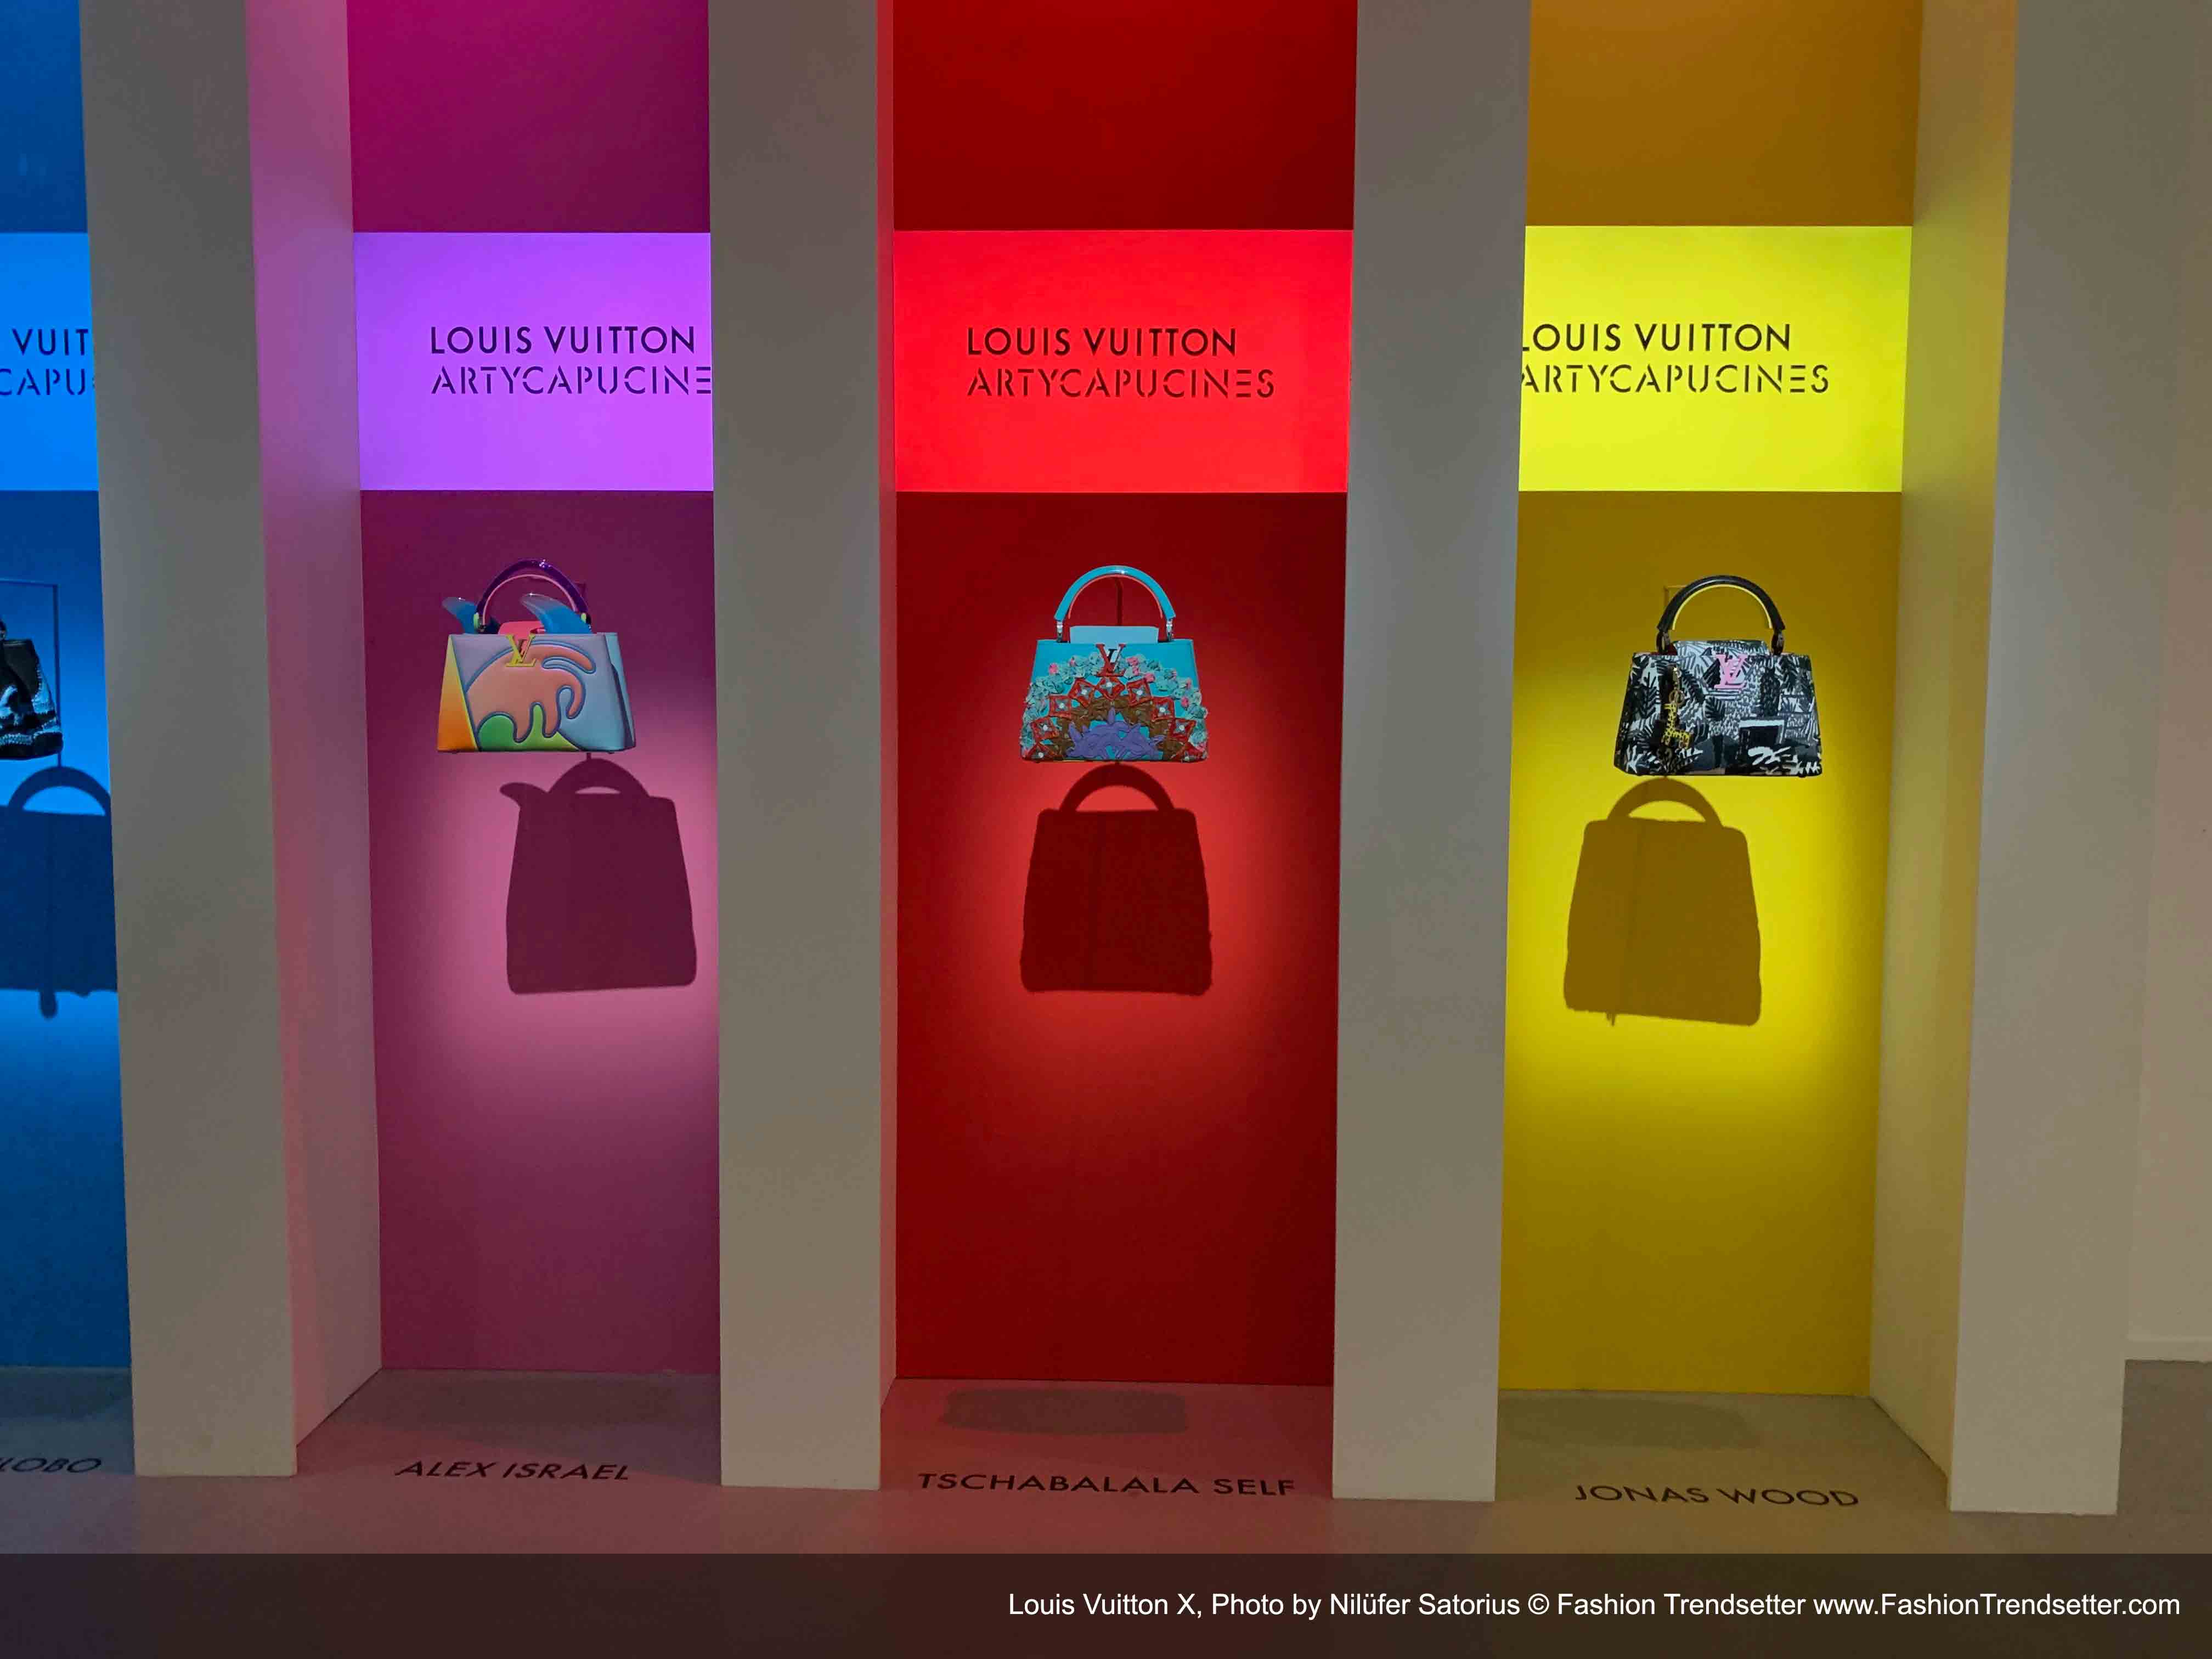 The microscopic 'Louis Vuitton'. Plus 0.0000001 inventory space